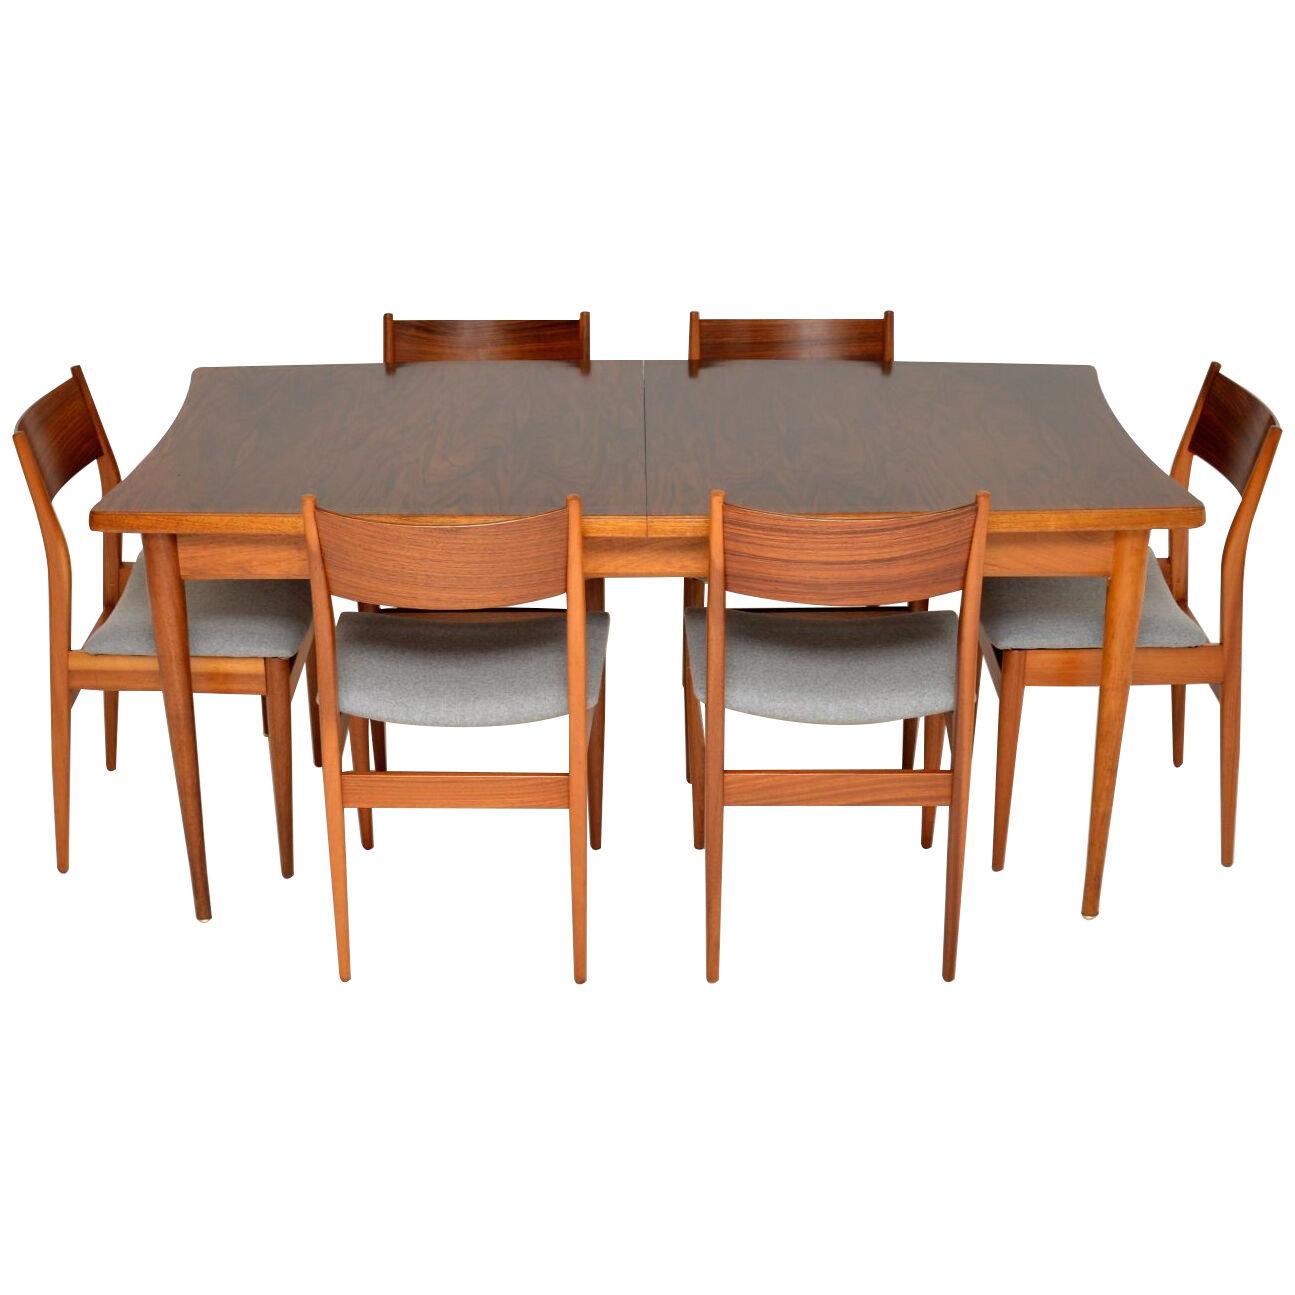 1960's Rosewood & Mahogany Dining Table & Chairs by Uniflex